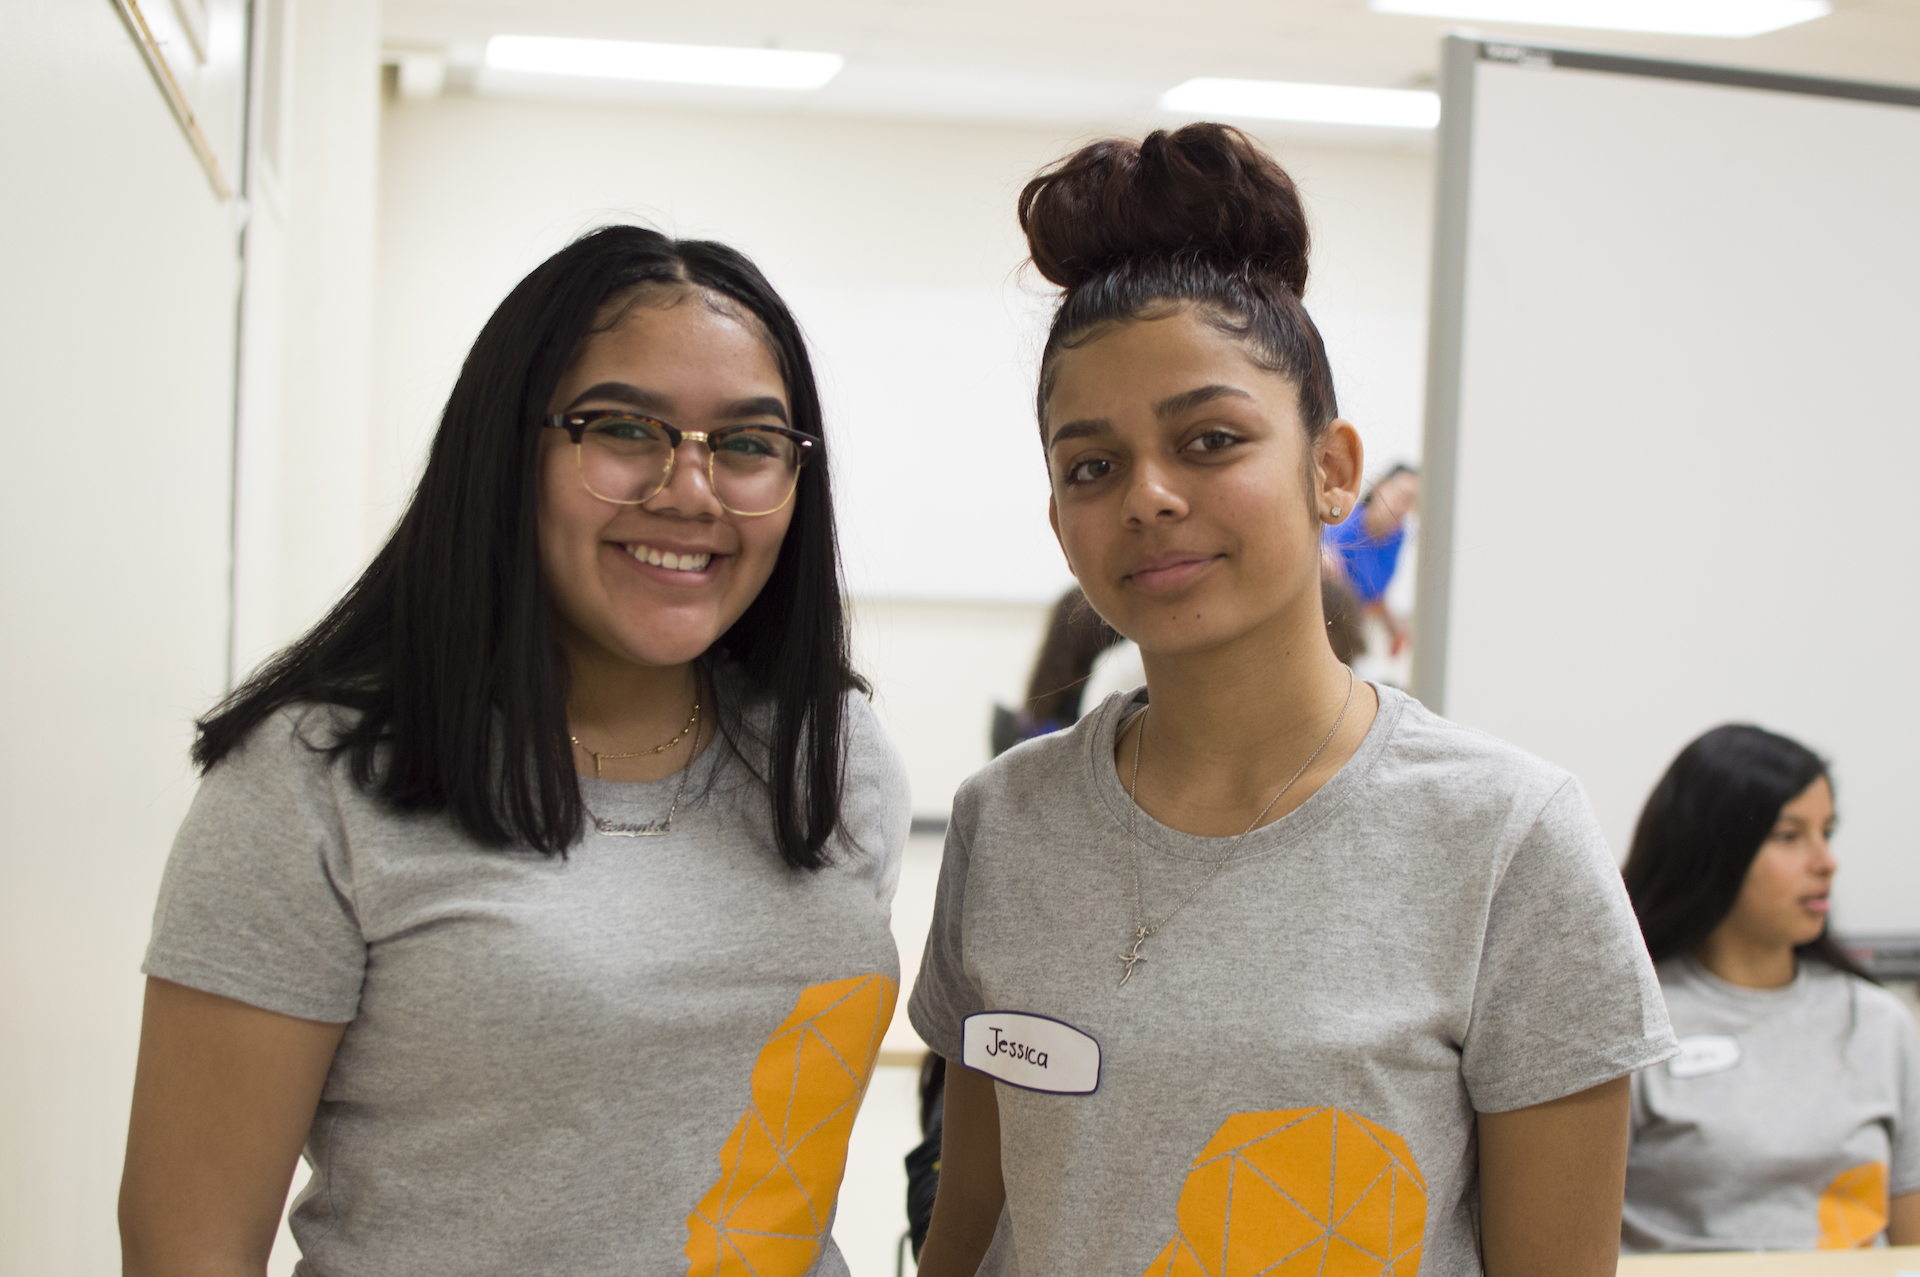 Two Power to Girls volunteers and mentors smiling at the camera during a program